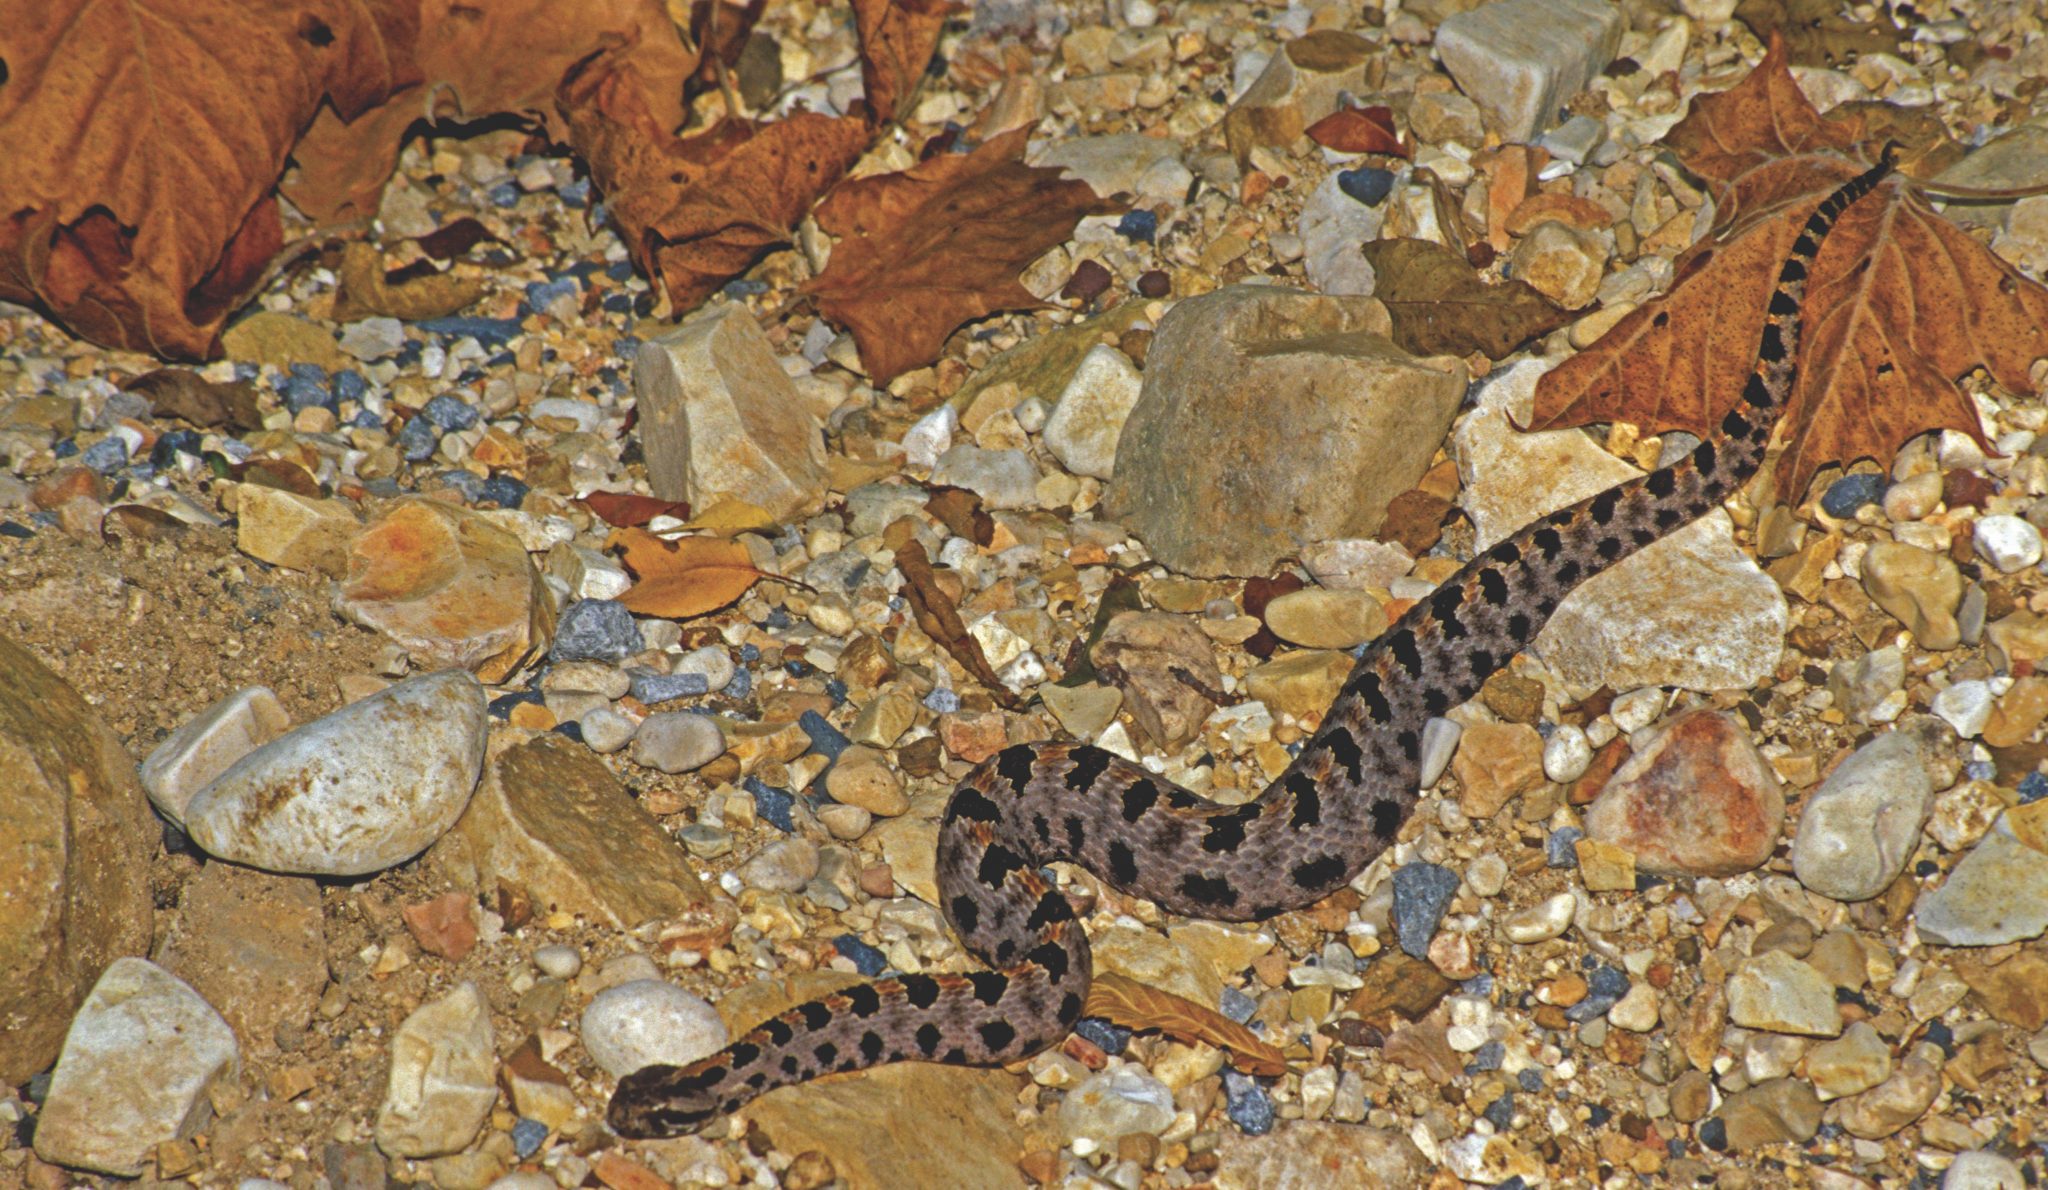 Role of Snakes in Alabama